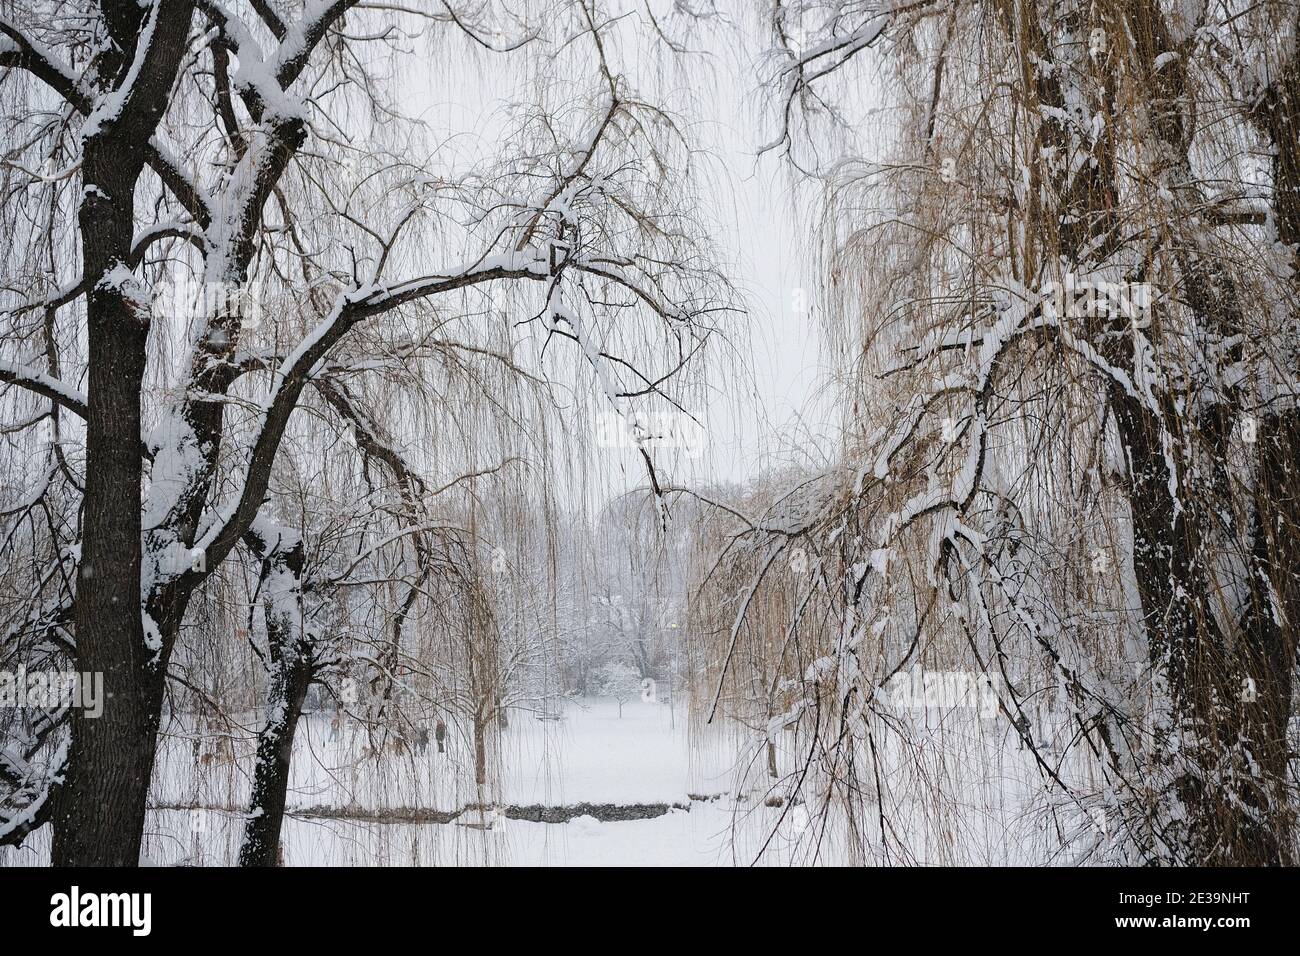 Snow covered willow trees line a frozen and snowy Browns Inlet in mid winter in Ottawa, Ontario, Canada. Stock Photo